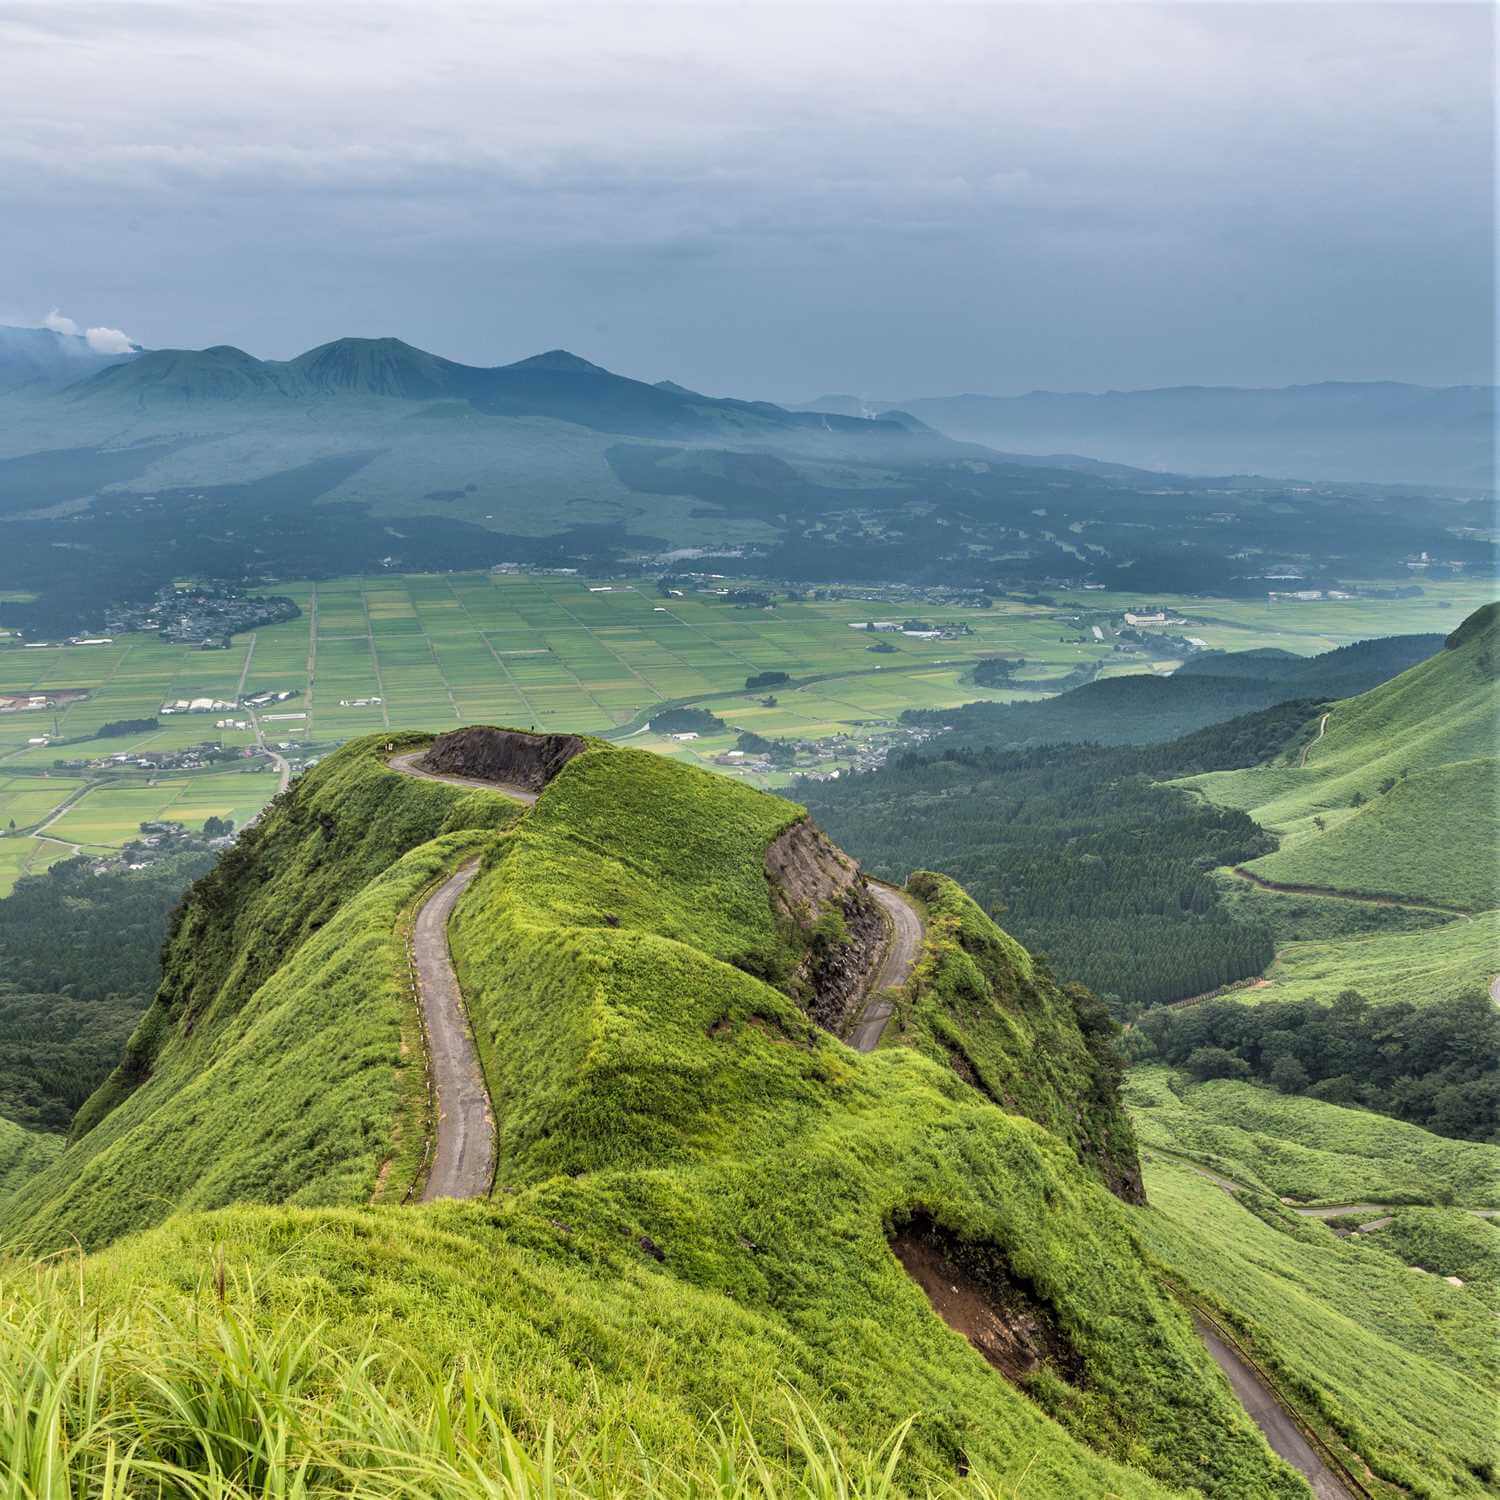 Daikanbo, one of the tourist attractions in Aso, Kumamoto Prefecture, Japan = Shutterstock